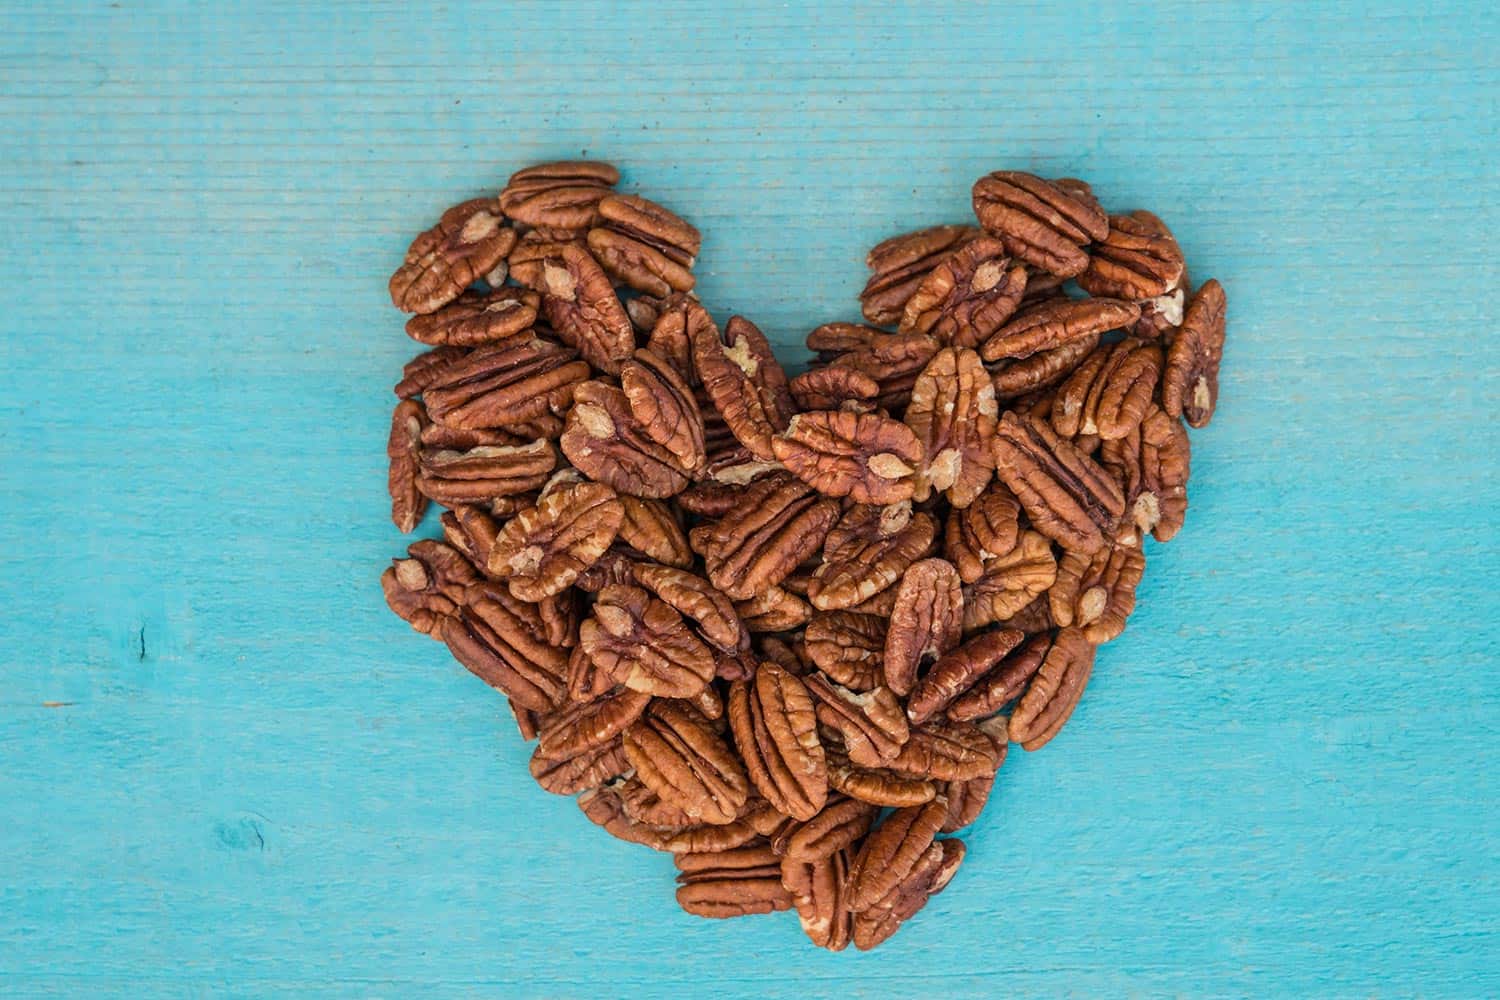 Pecan nuts make heart on turquoise table